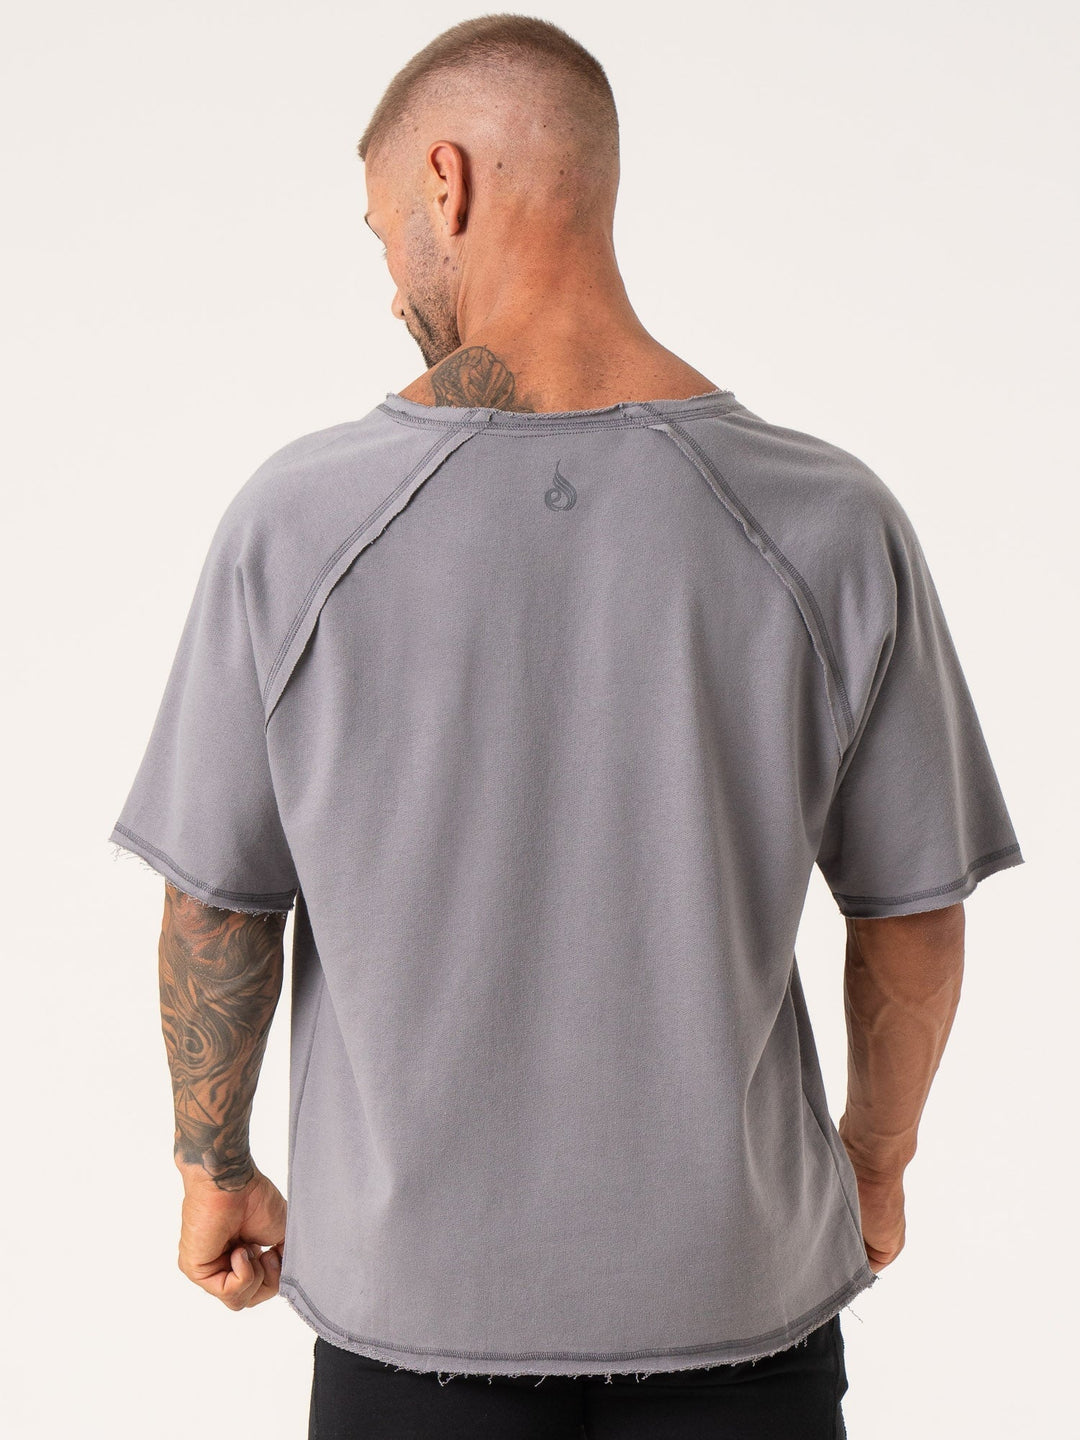 Force Rag Top - Charcoal Clothing Ryderwear 